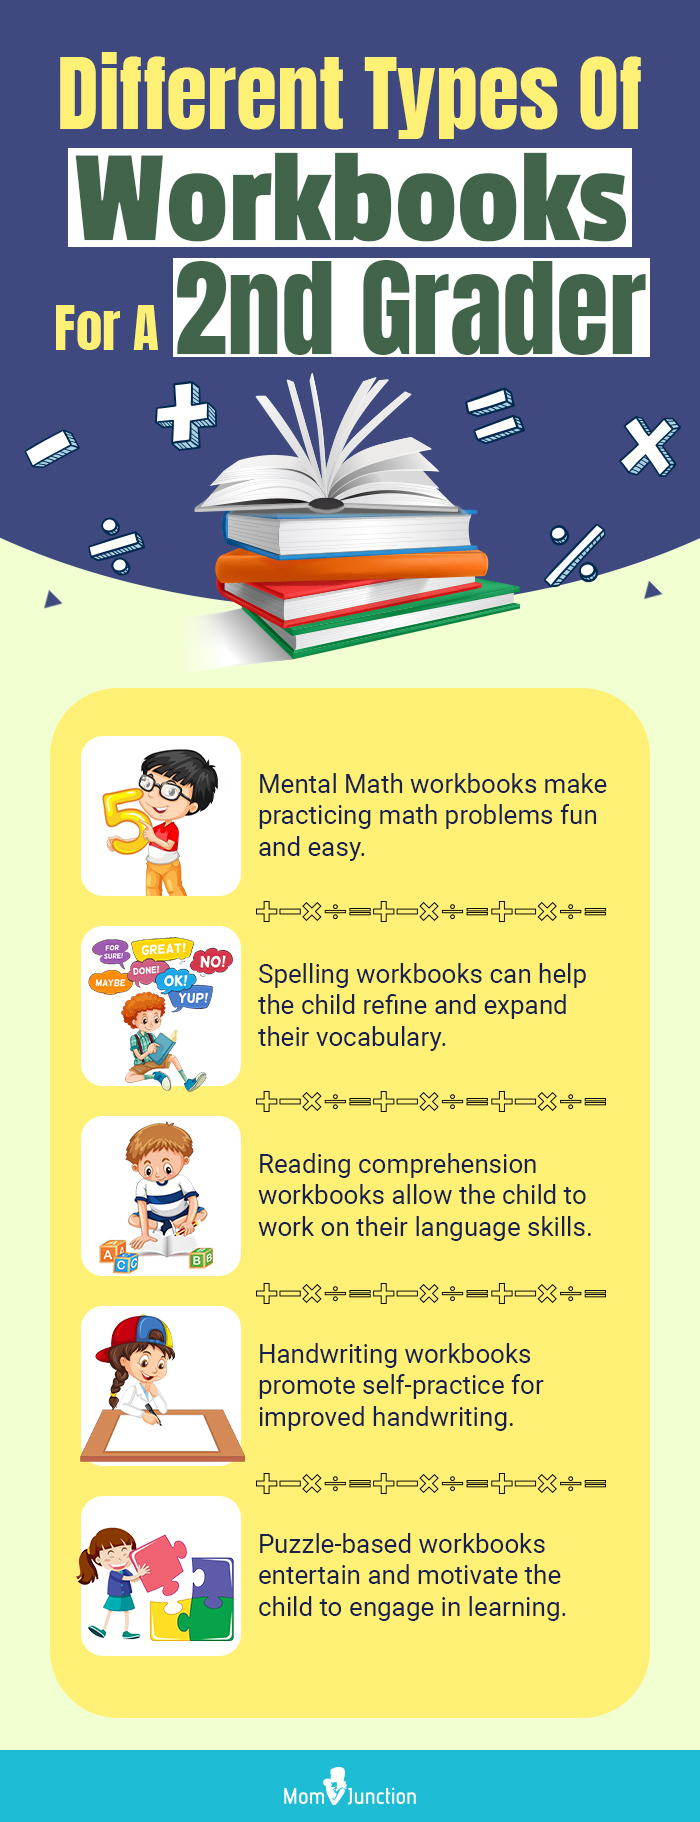 Different Types Of Workbooks For A 2nd Grader (infographic)